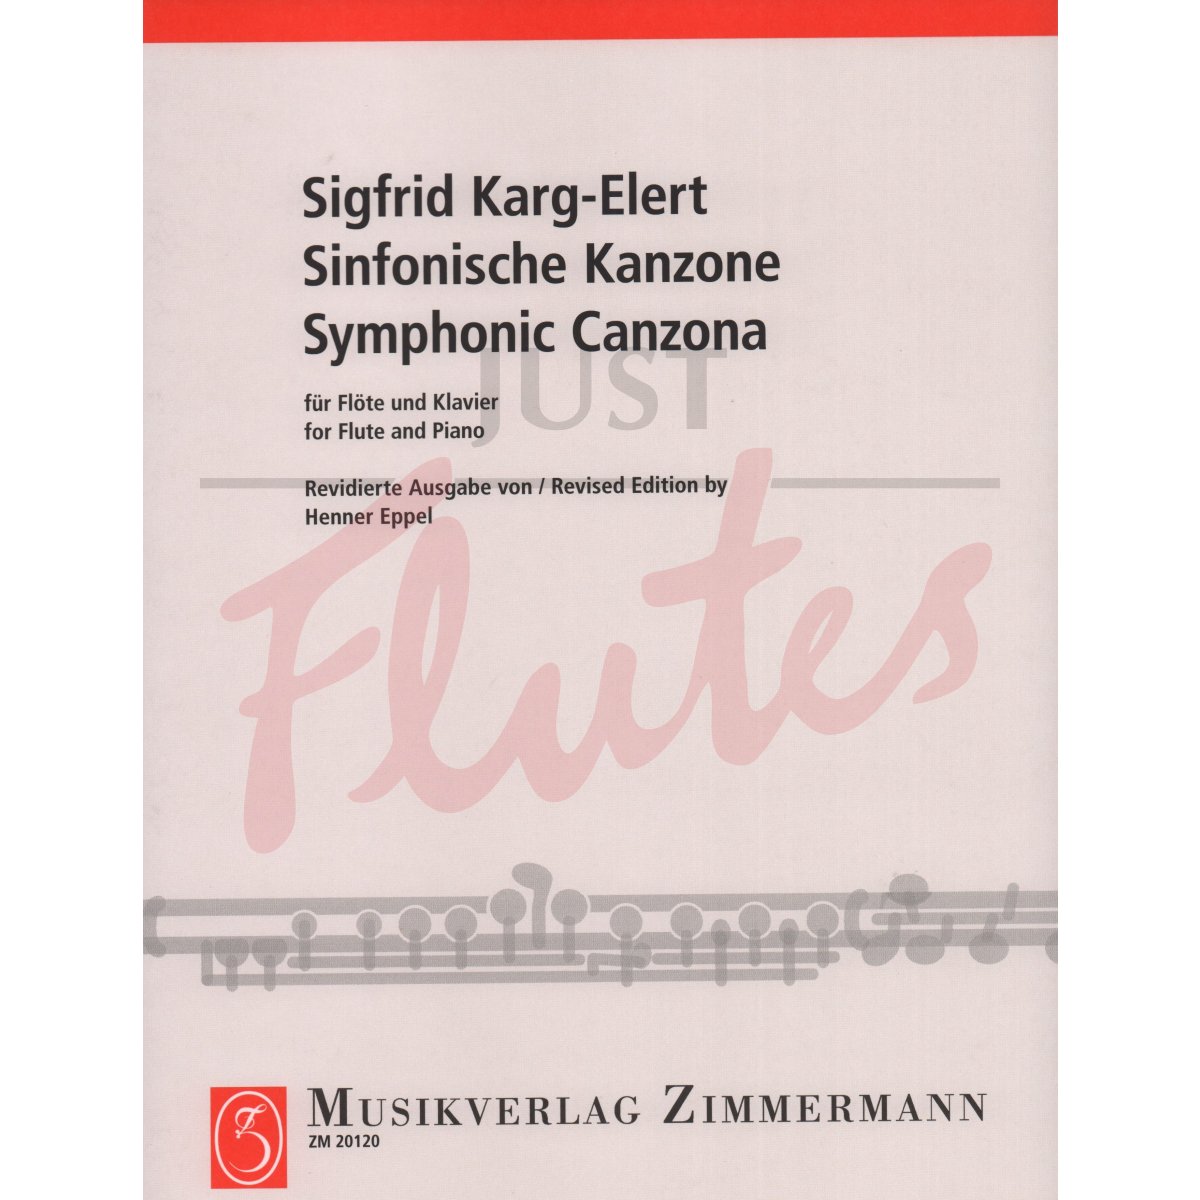 Sinfonische Kanzone for Flute and Piano